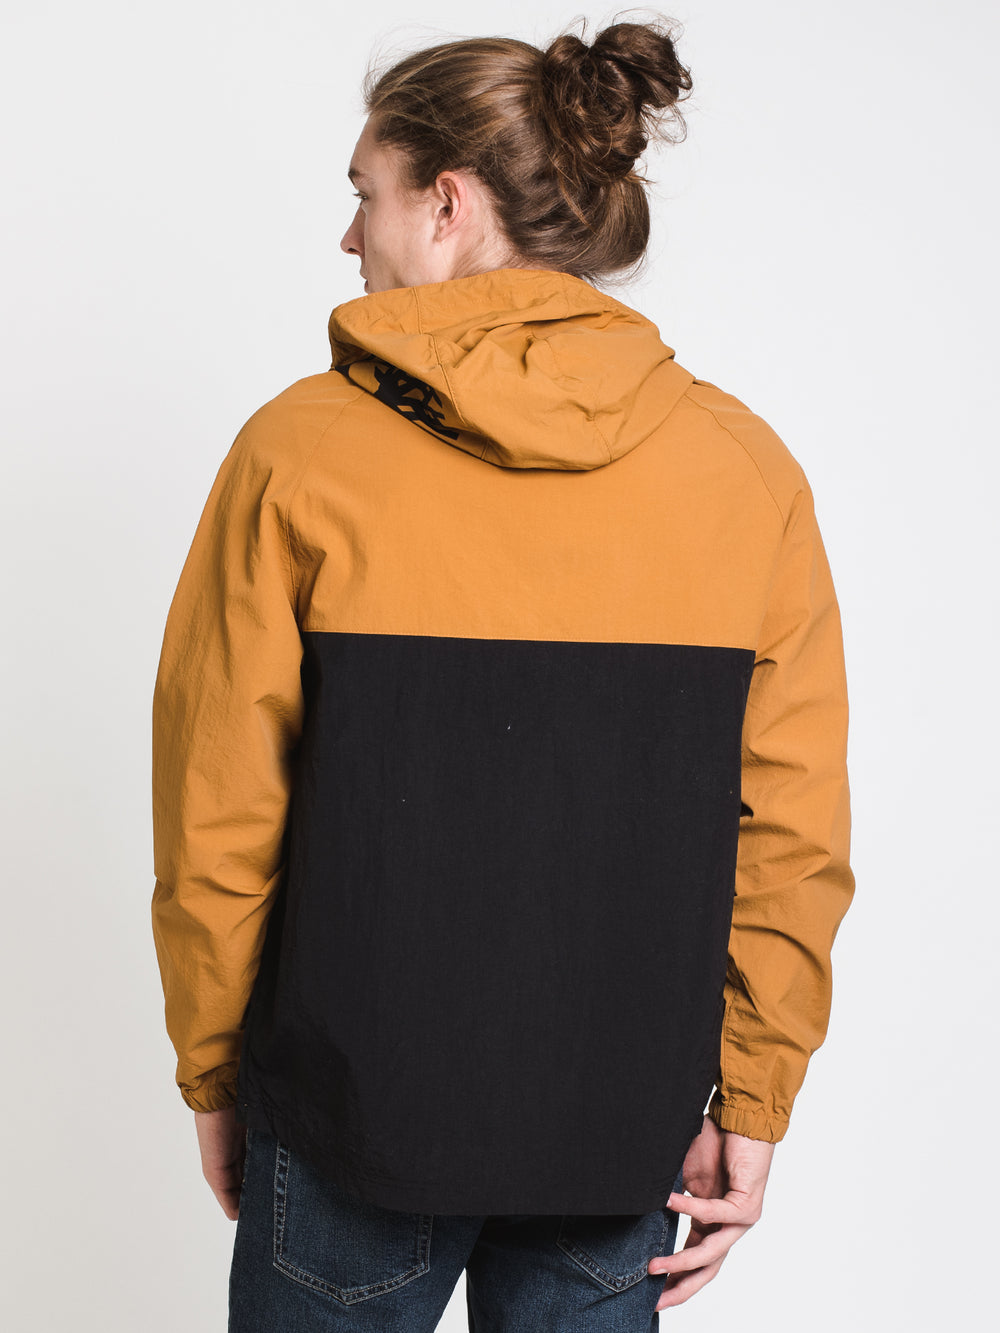 TIMBERLAND WINBREAKER PULLOVER JACKET - CLEARANCE